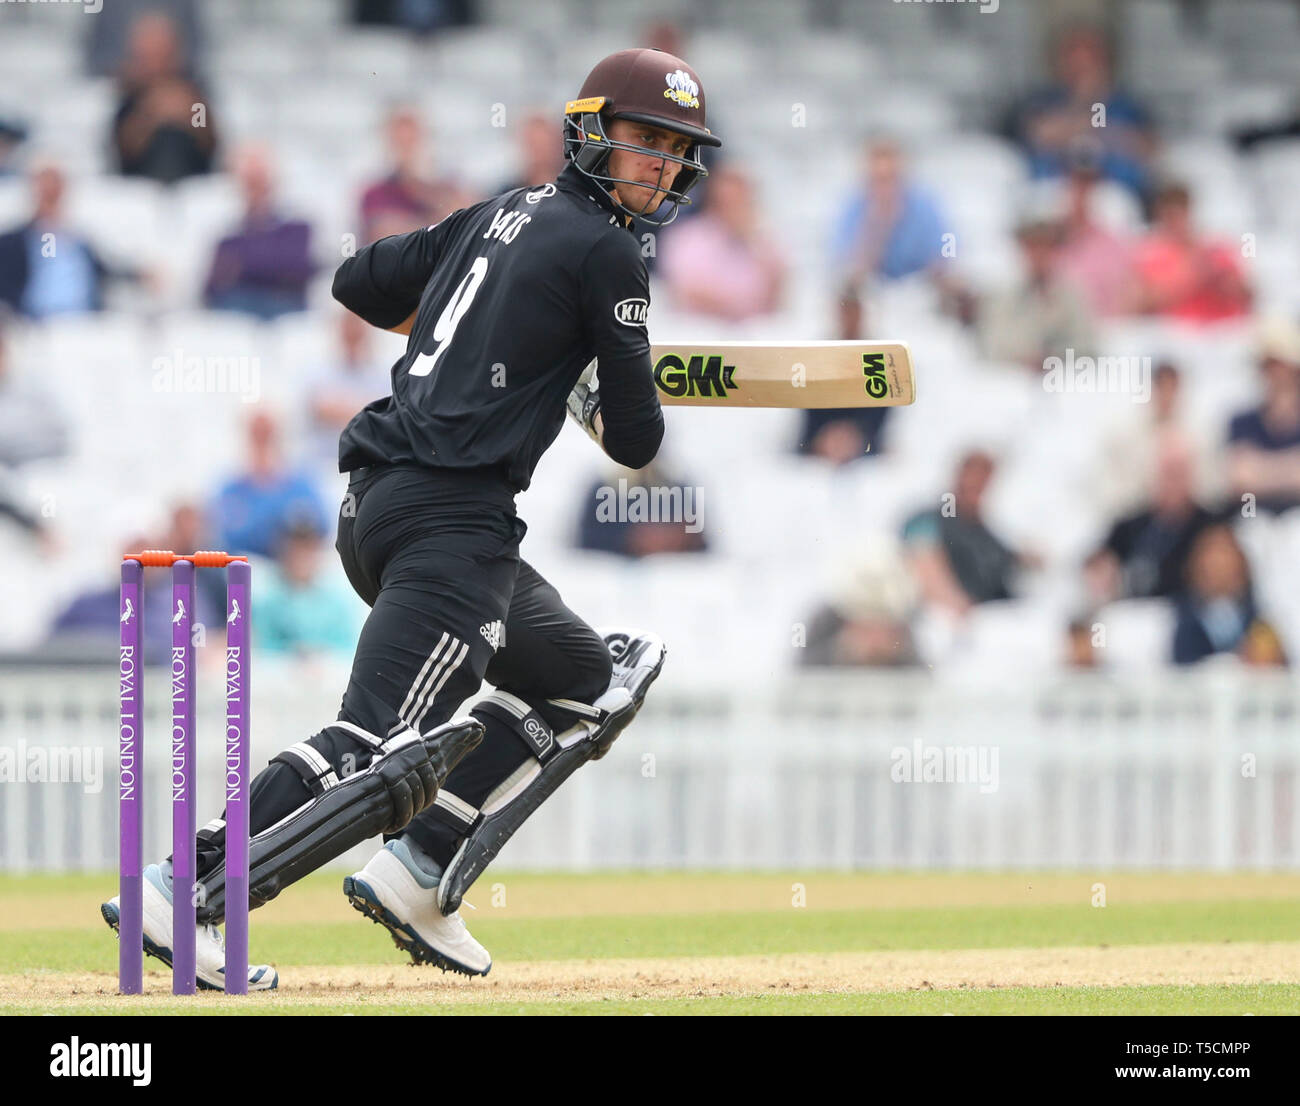 London, UK. 23 April 2019: Will Jacks of of Surrey plays a shot during the Surrey v Essex, Royal London One Day Cup match at The Kia Oval. Credit: Mitchell Gunn/ESPA-Images/Alamy Live News Stock Photo